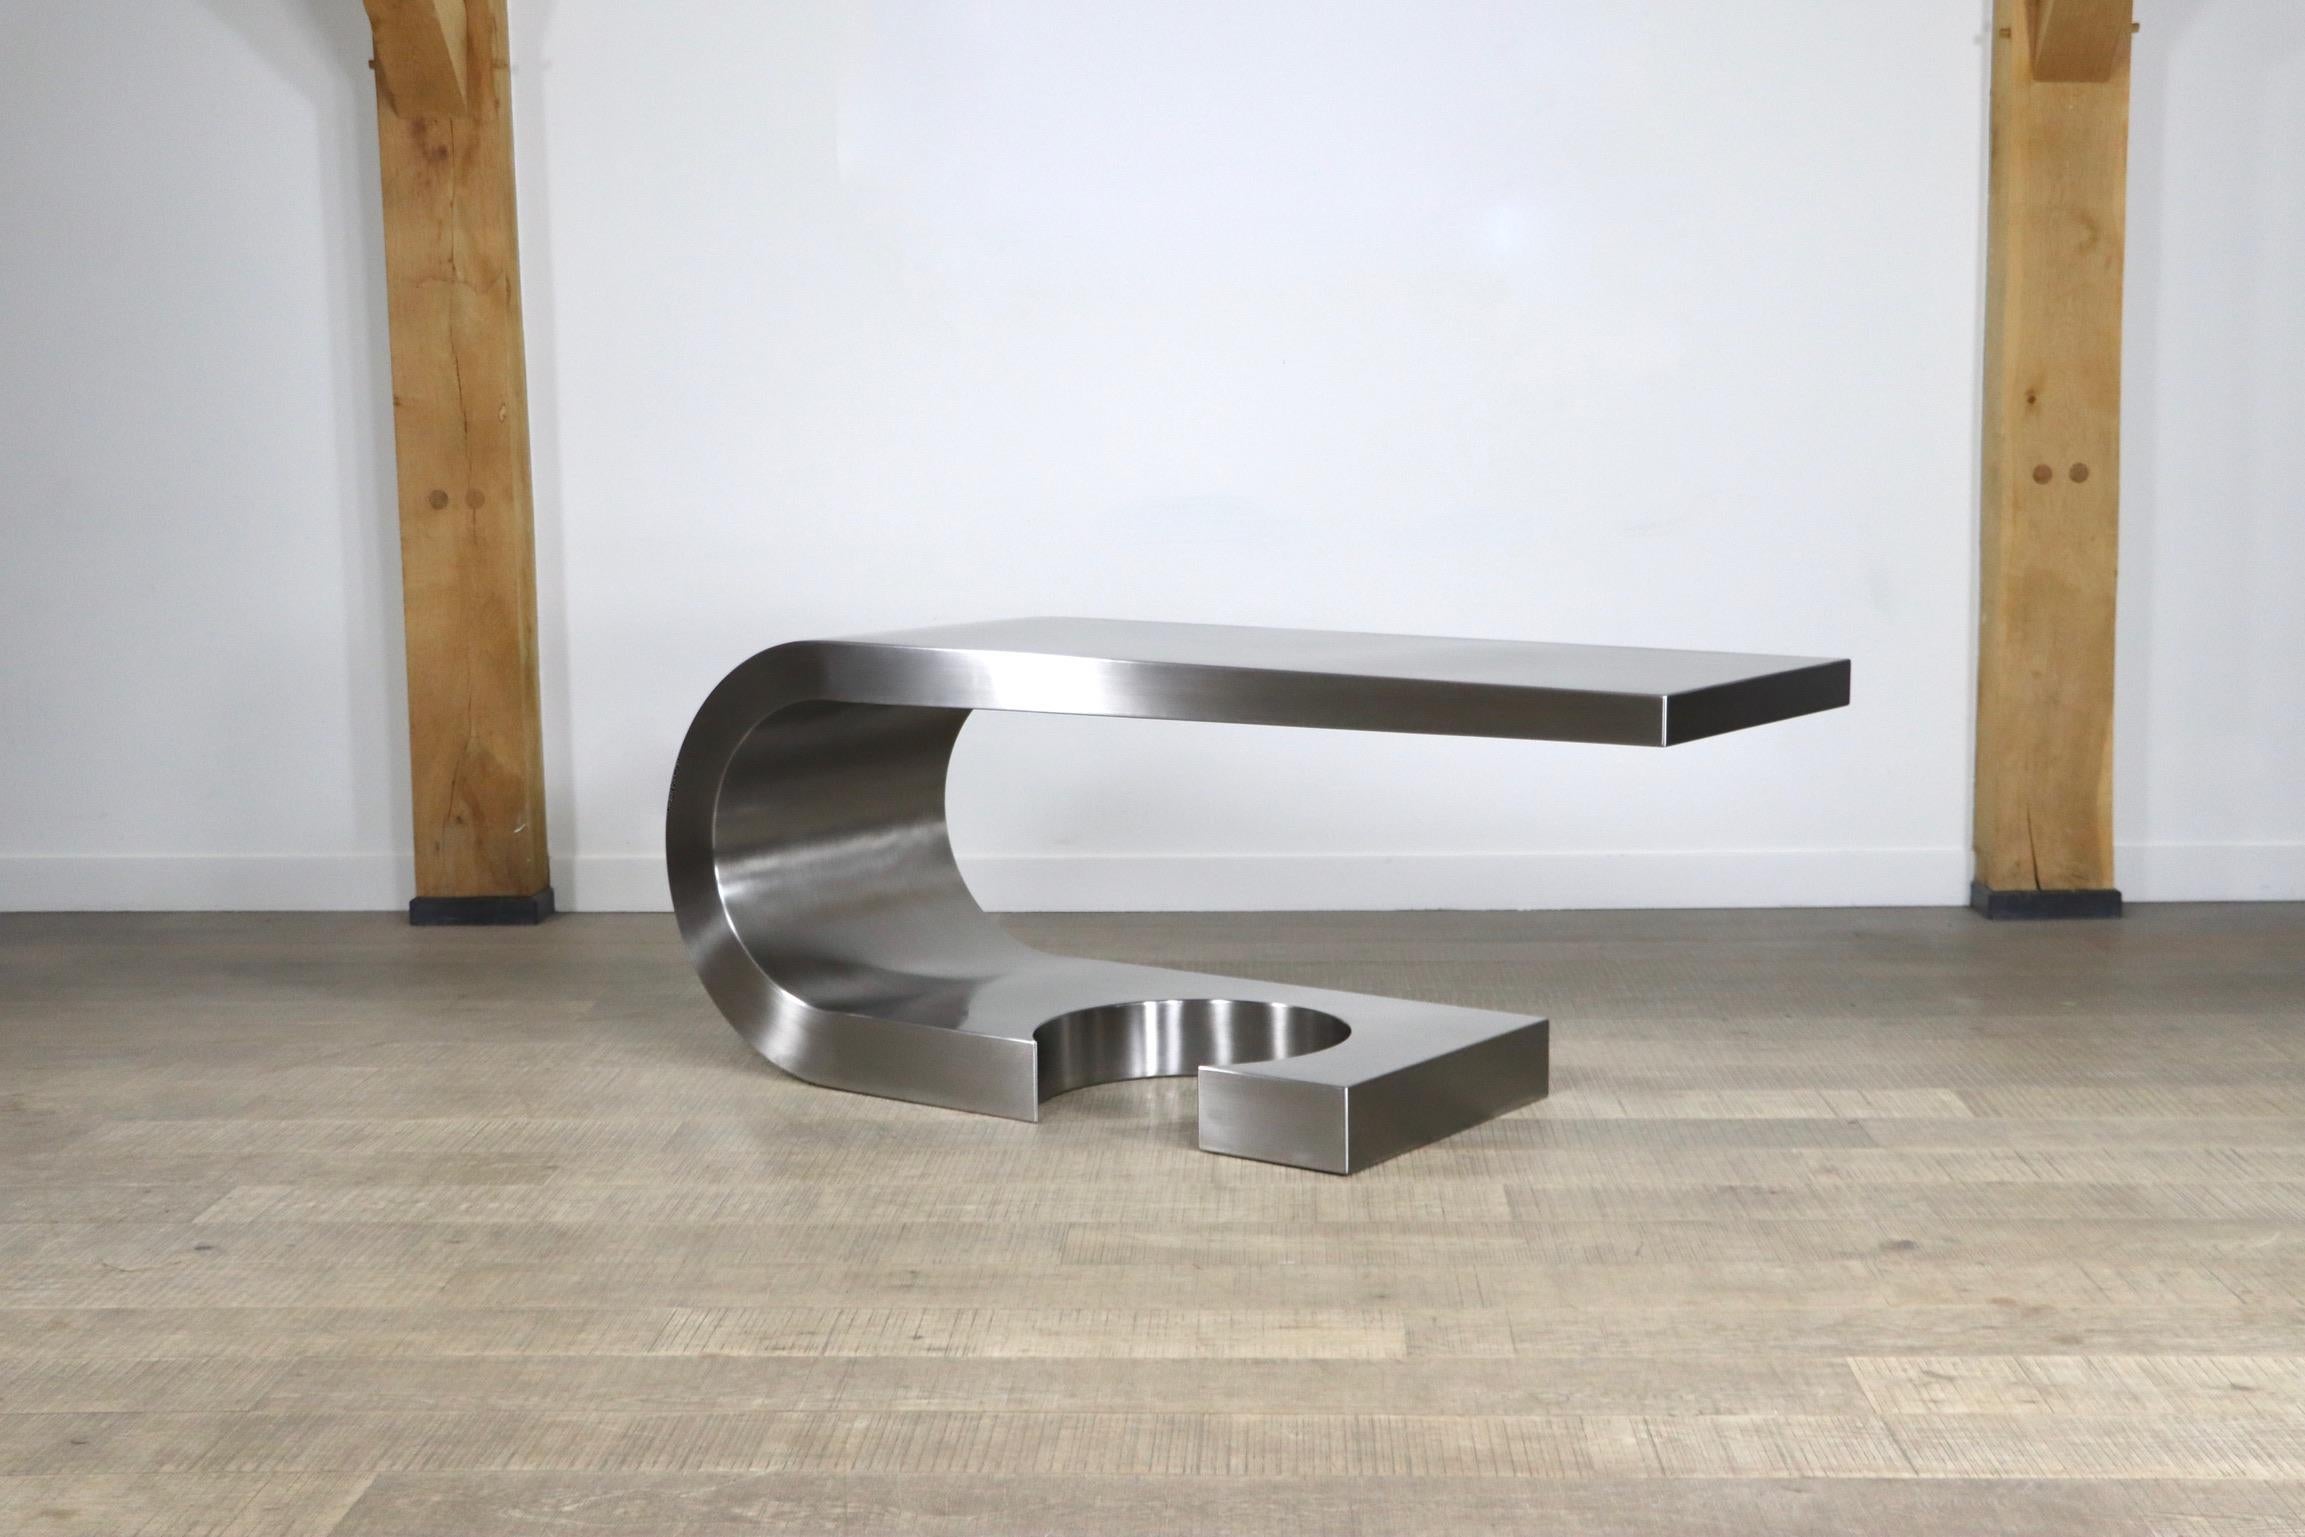 Stunning stainless steel cantilever desk model Diapason, designed by Marzio Cecchi for Studio Most Firenze in the 1970s. 
The exceptional high quality bent stainless steel with cutout base will give any space a prominent and luxurious feeling. This